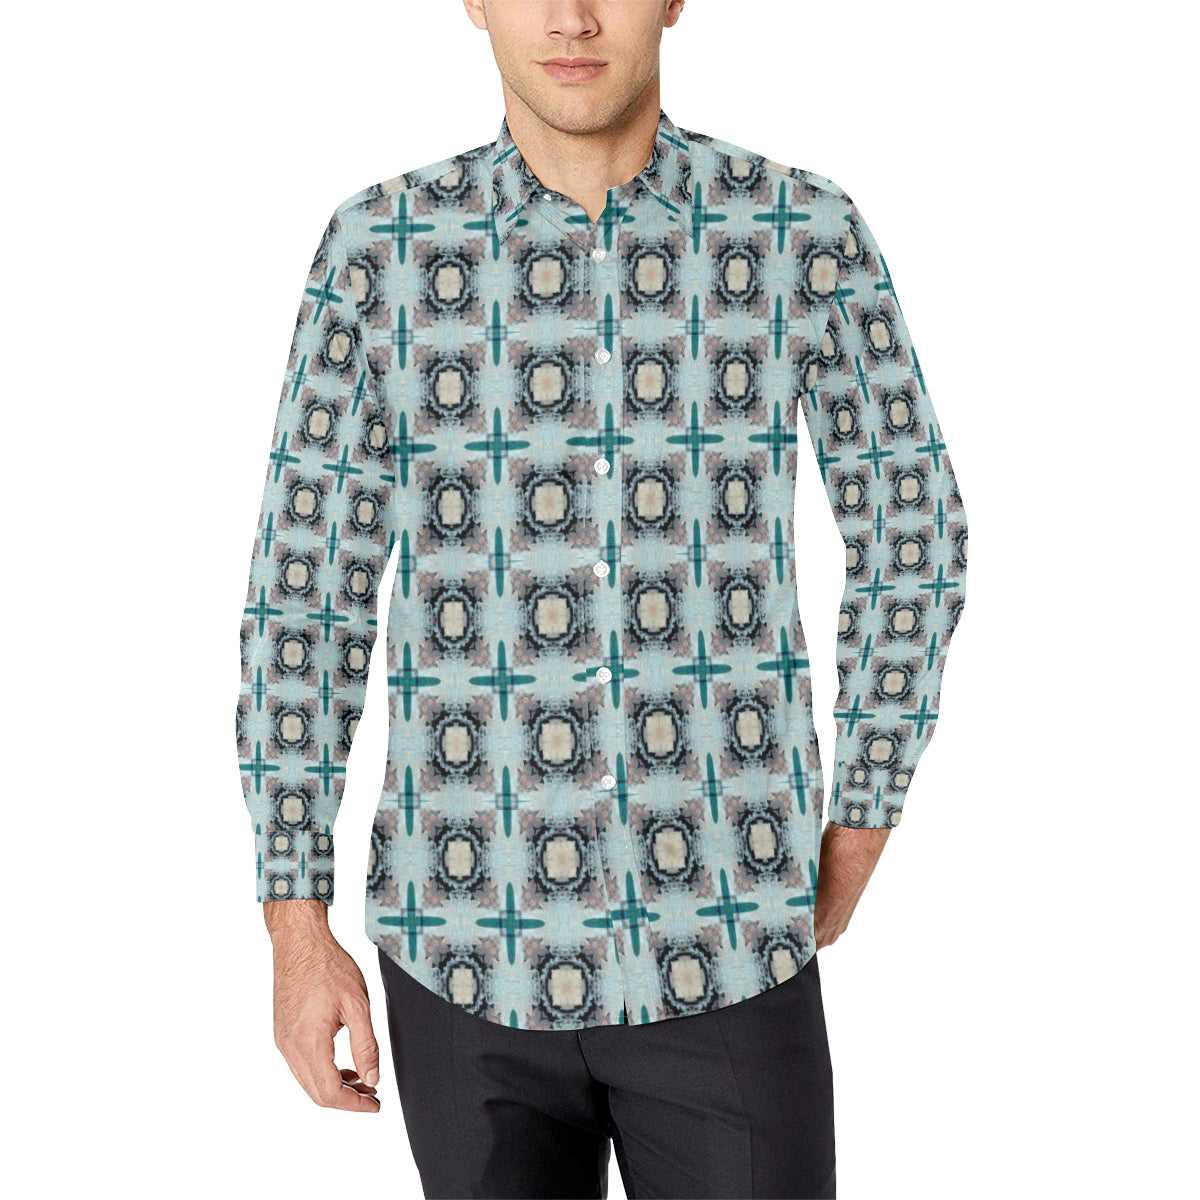 Men's Long Sleeve Shirt All Over Print By ChuArts